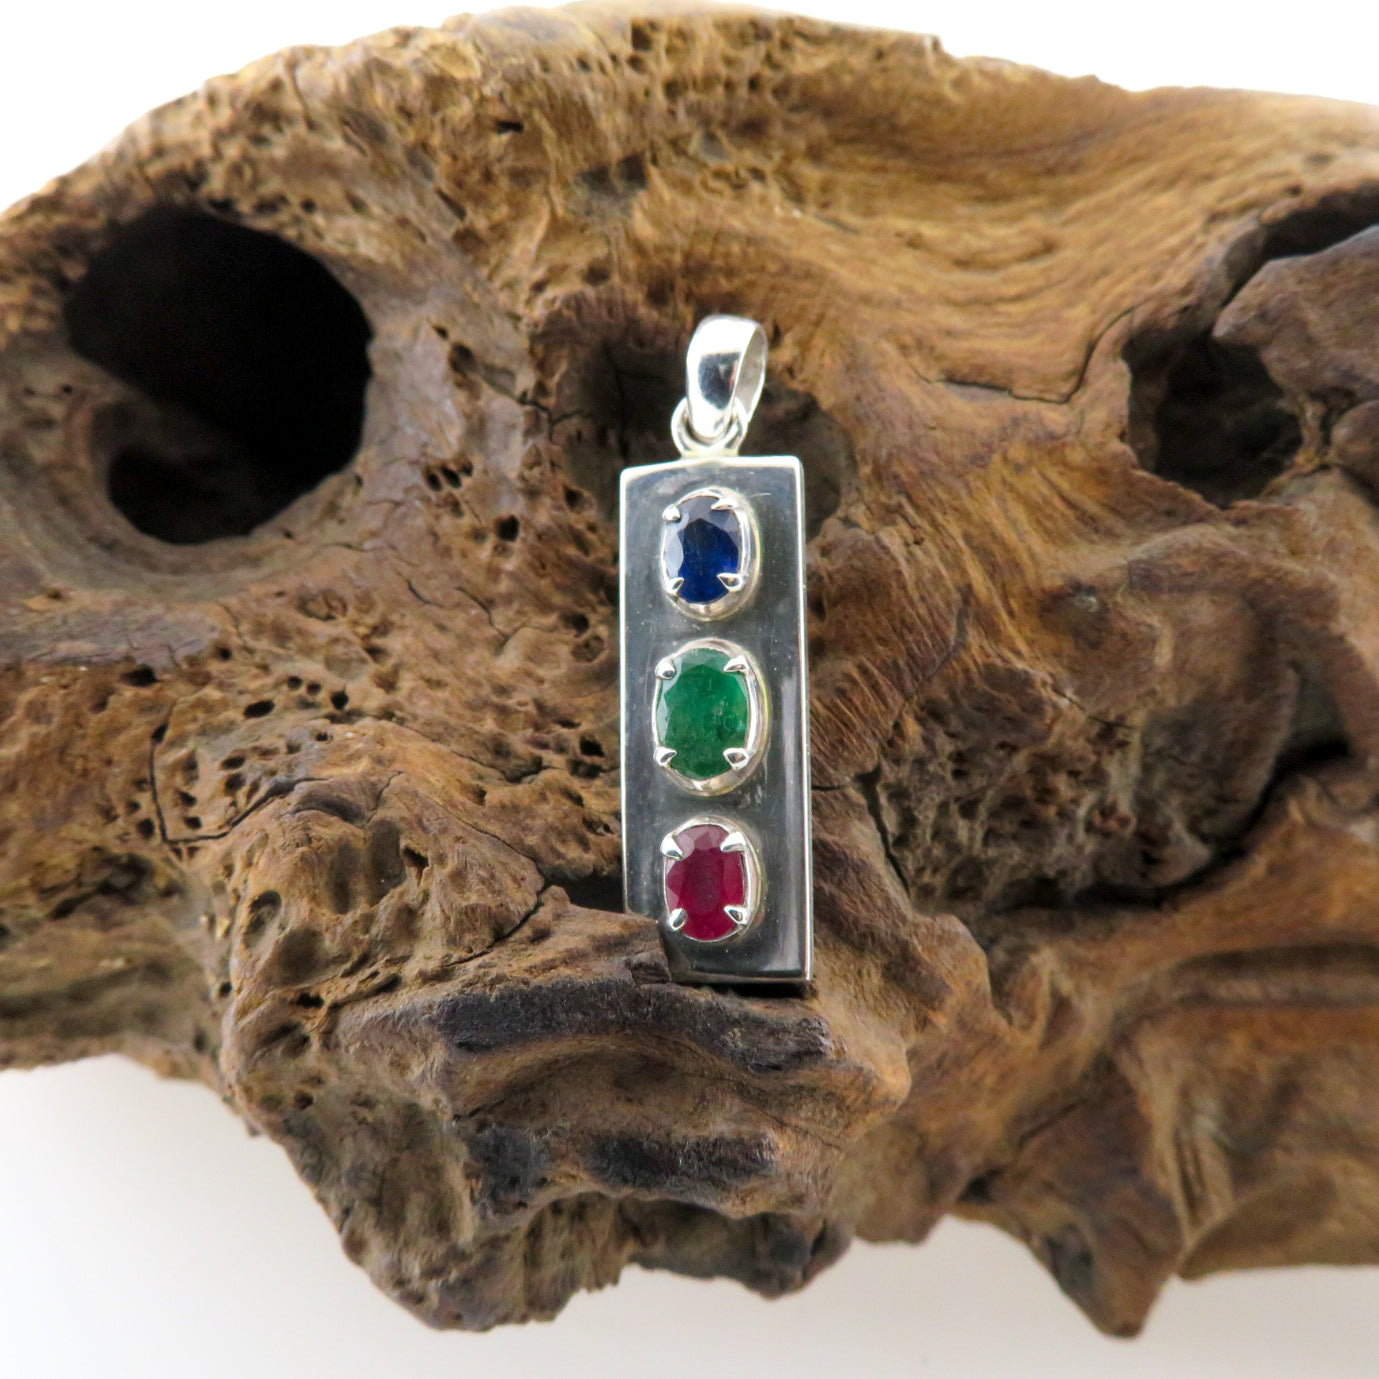 Sterling Silver Pendant with Blue Sapphire, Emerald and Ruby